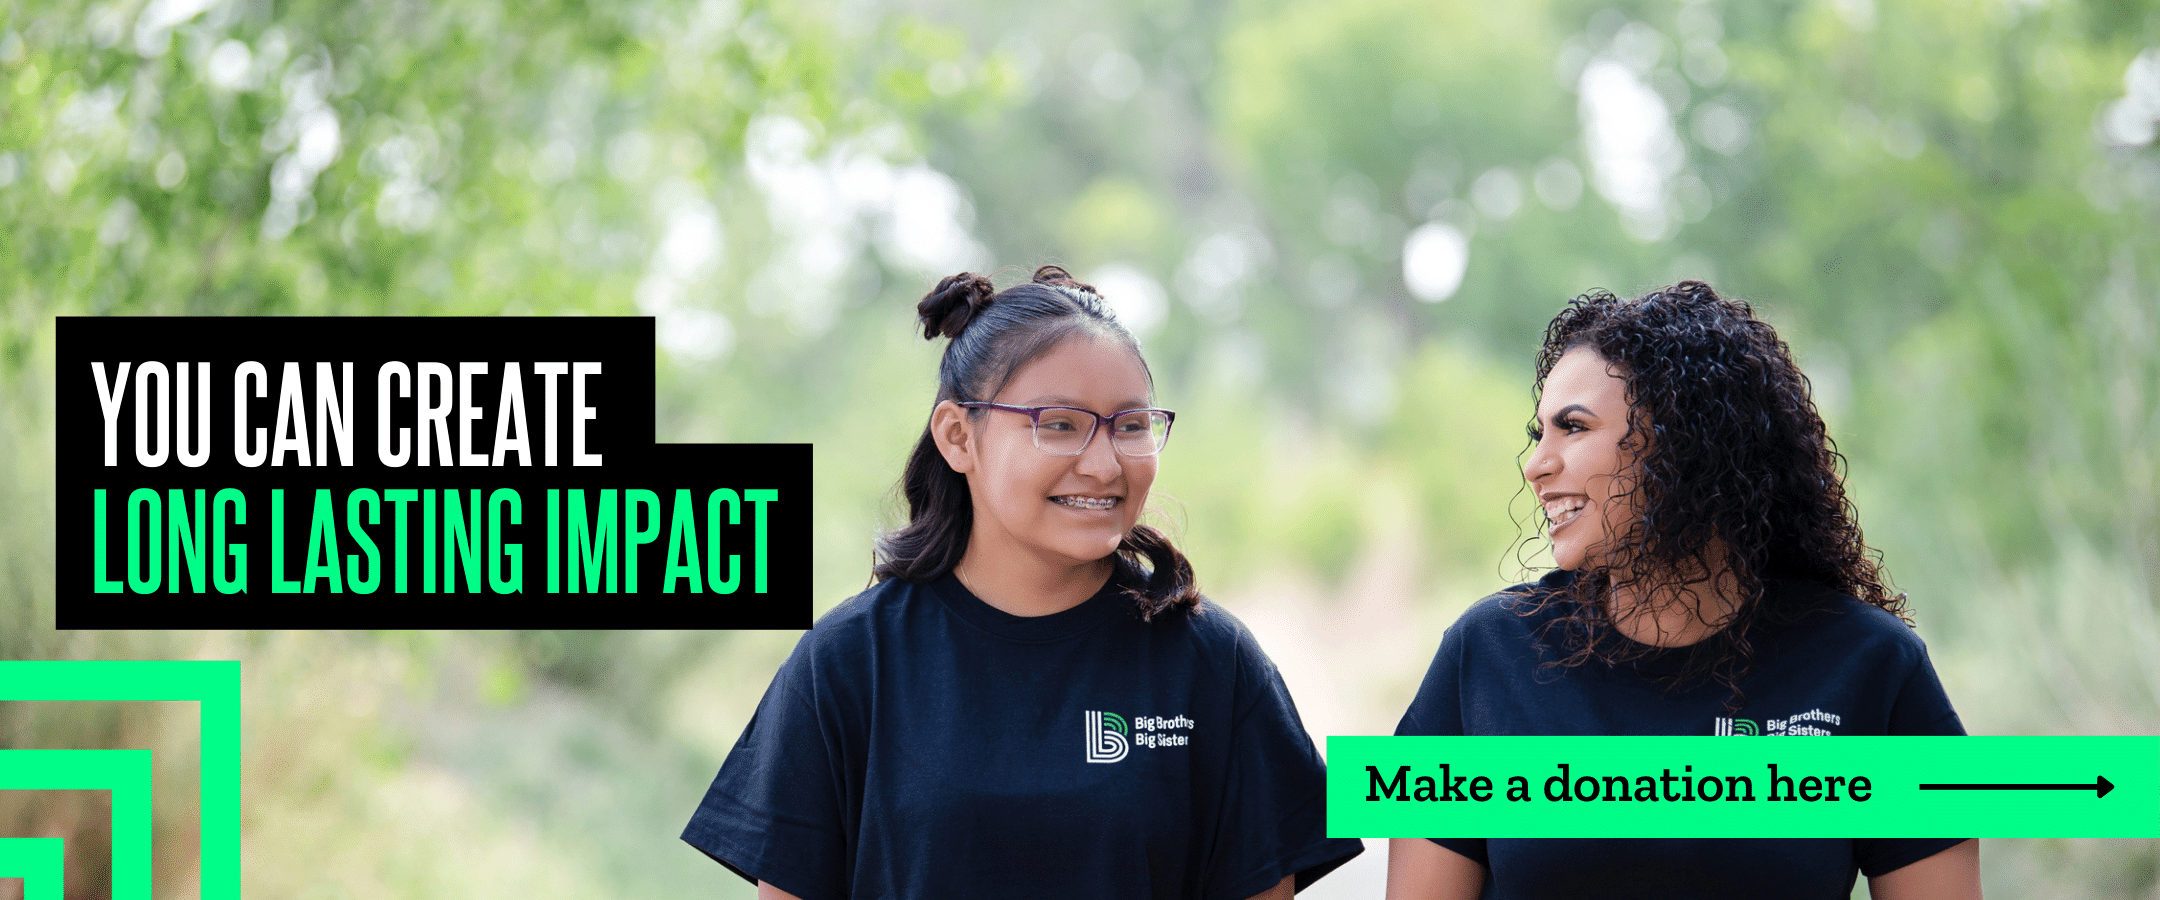 An adult female mentor and a young woman smile at each other as they walk through the woods. Over this image is text that says " You can create long-lasting impact. Make a donation here."